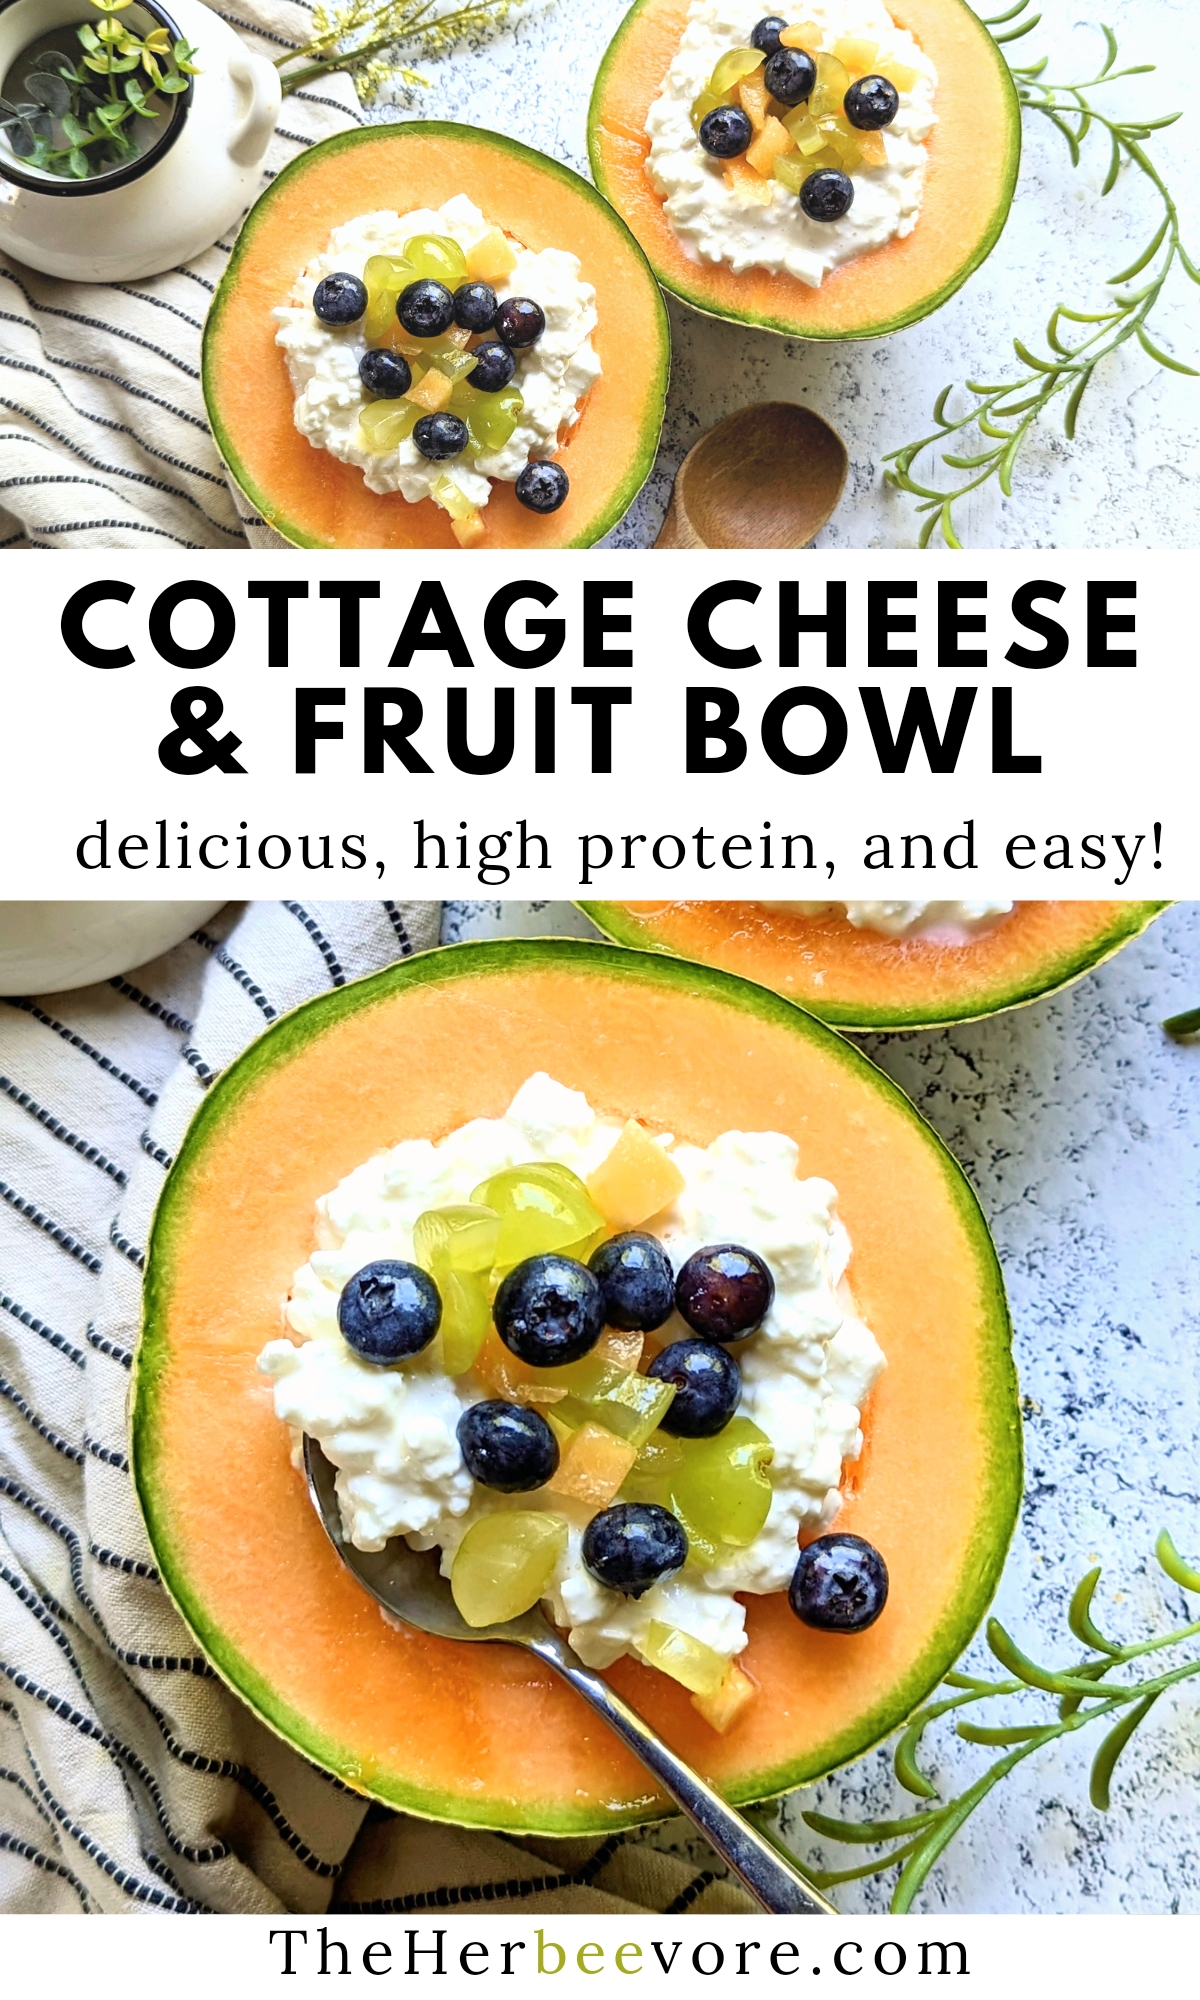 cottage cheese and fruit bowl recipe healthy high protein cottage cheese bowls with cantaloupe, grapes, honey, and blueberries.